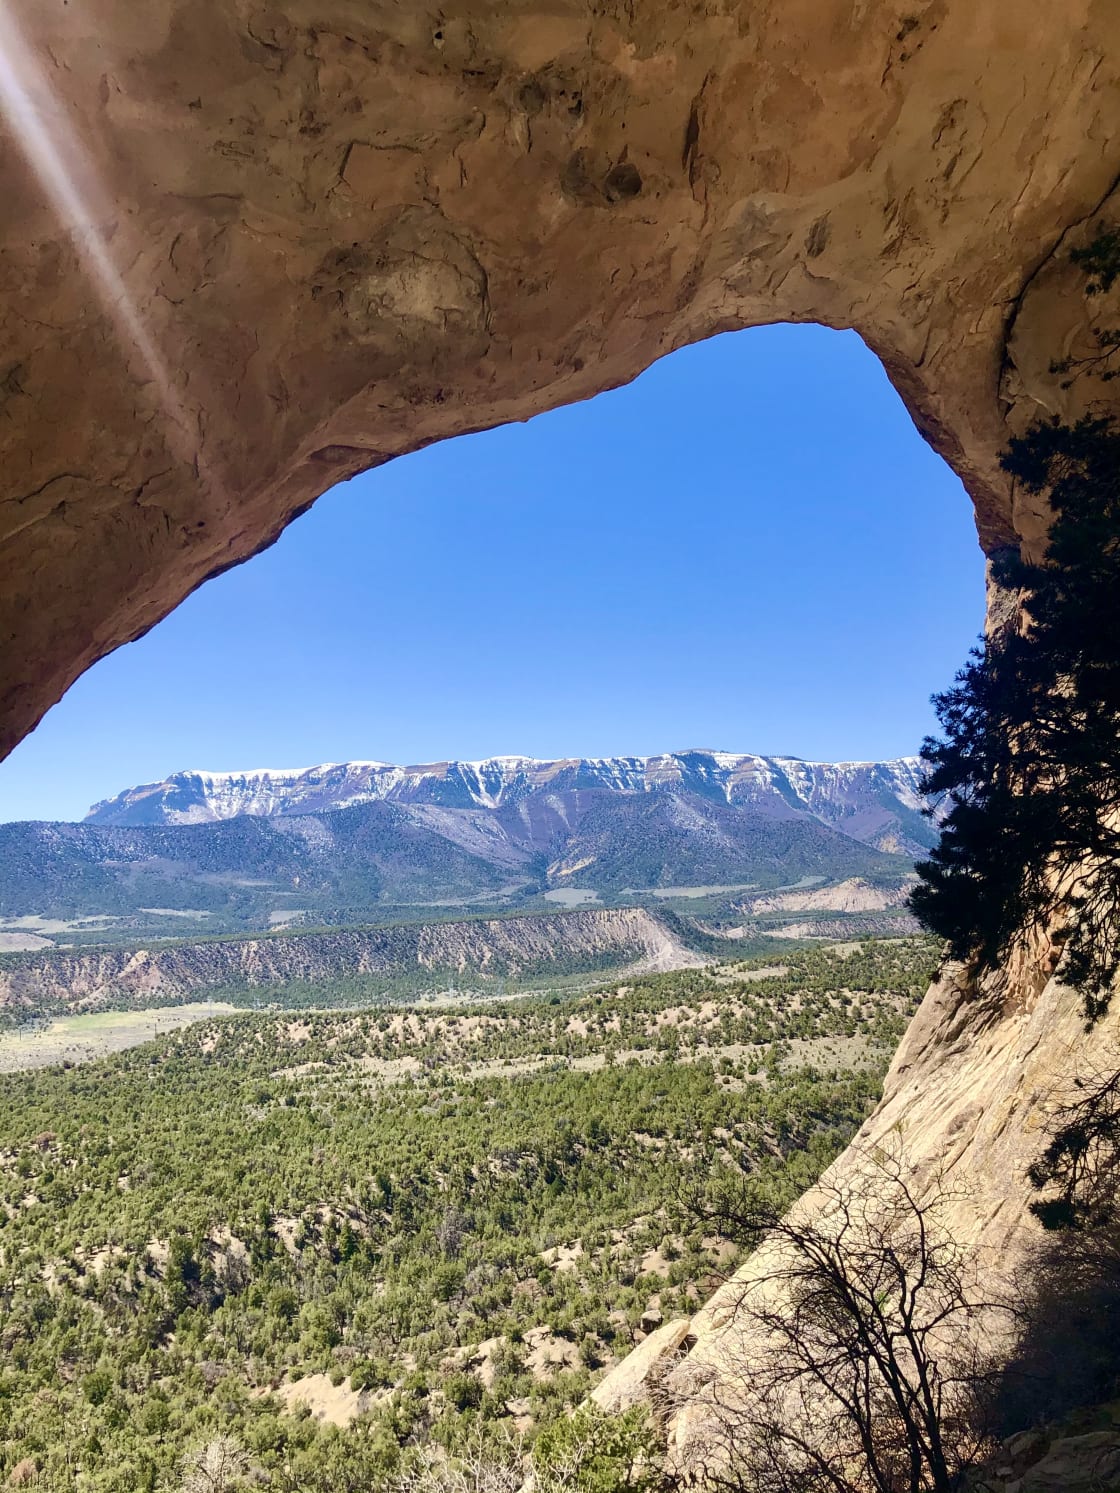 This is Rifle Arch, a hike 20 minutes away 